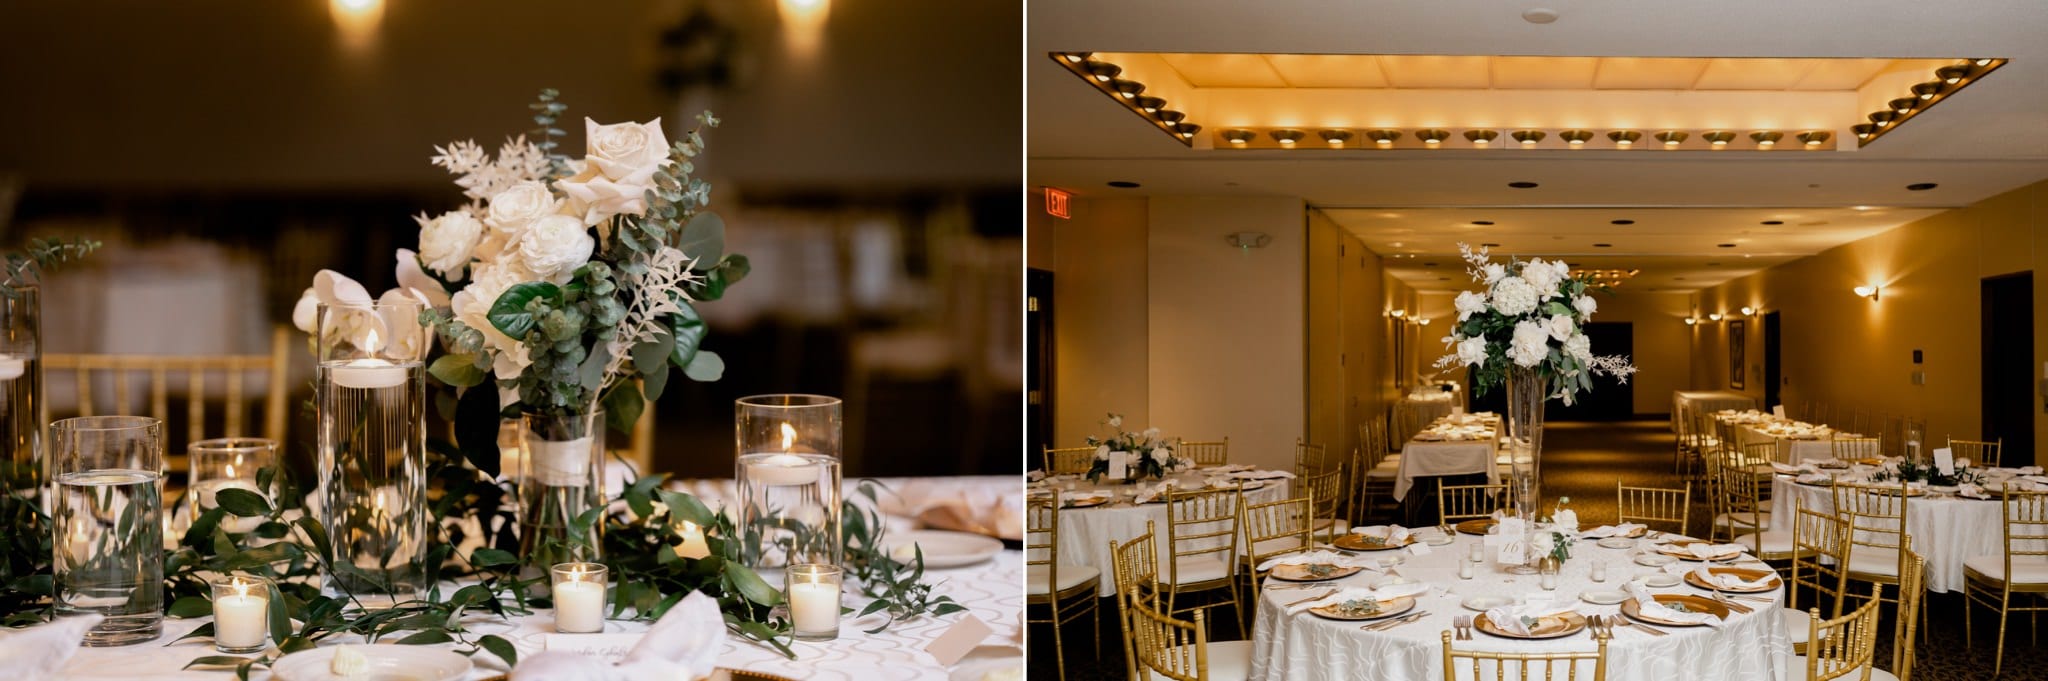 Des Moines Golf and Country Club wedding reception details